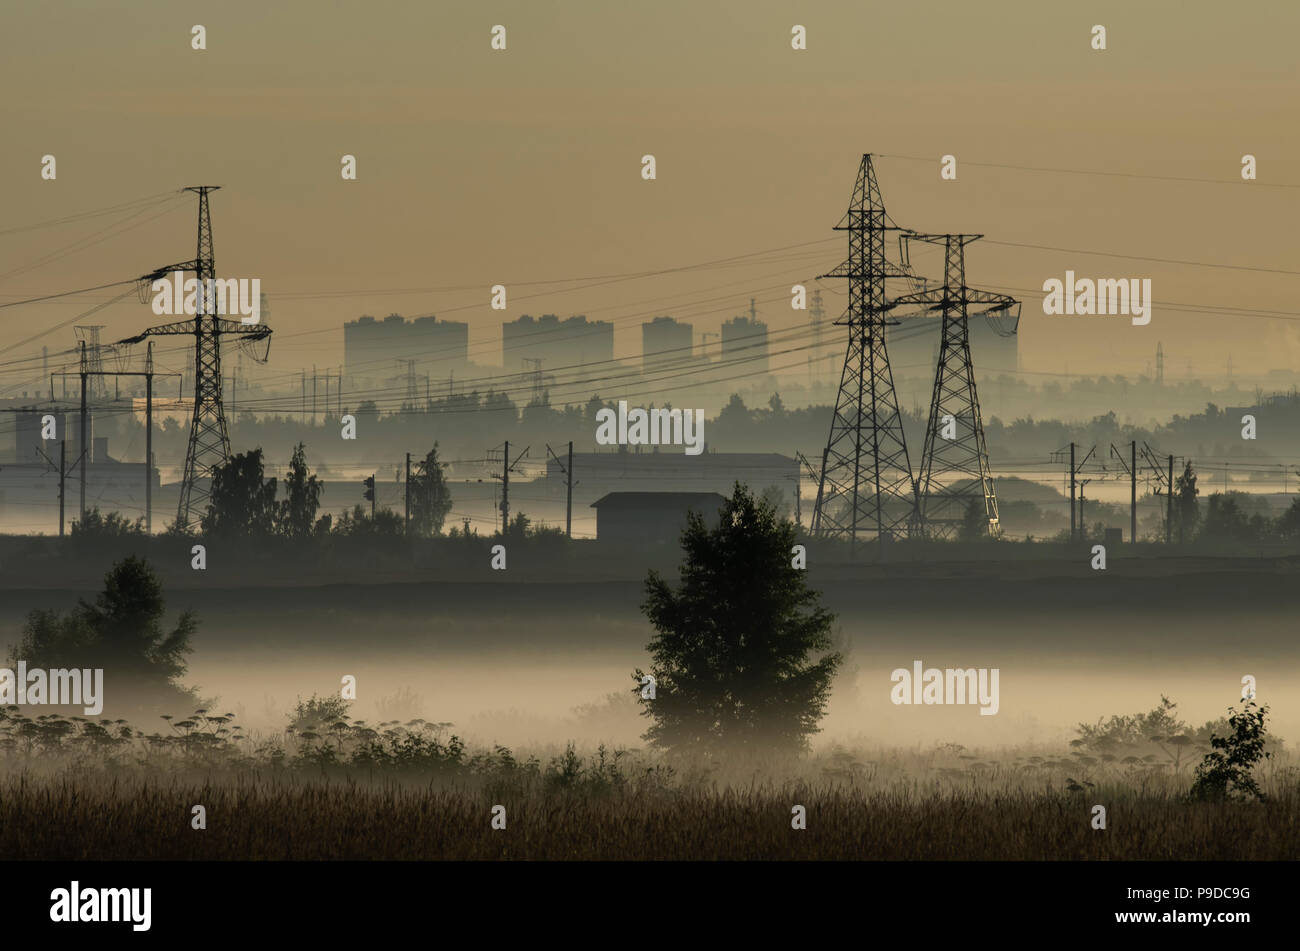 Fog over fields and towers of power lines on the outskirts of the city on the background of power lines Stock Photo